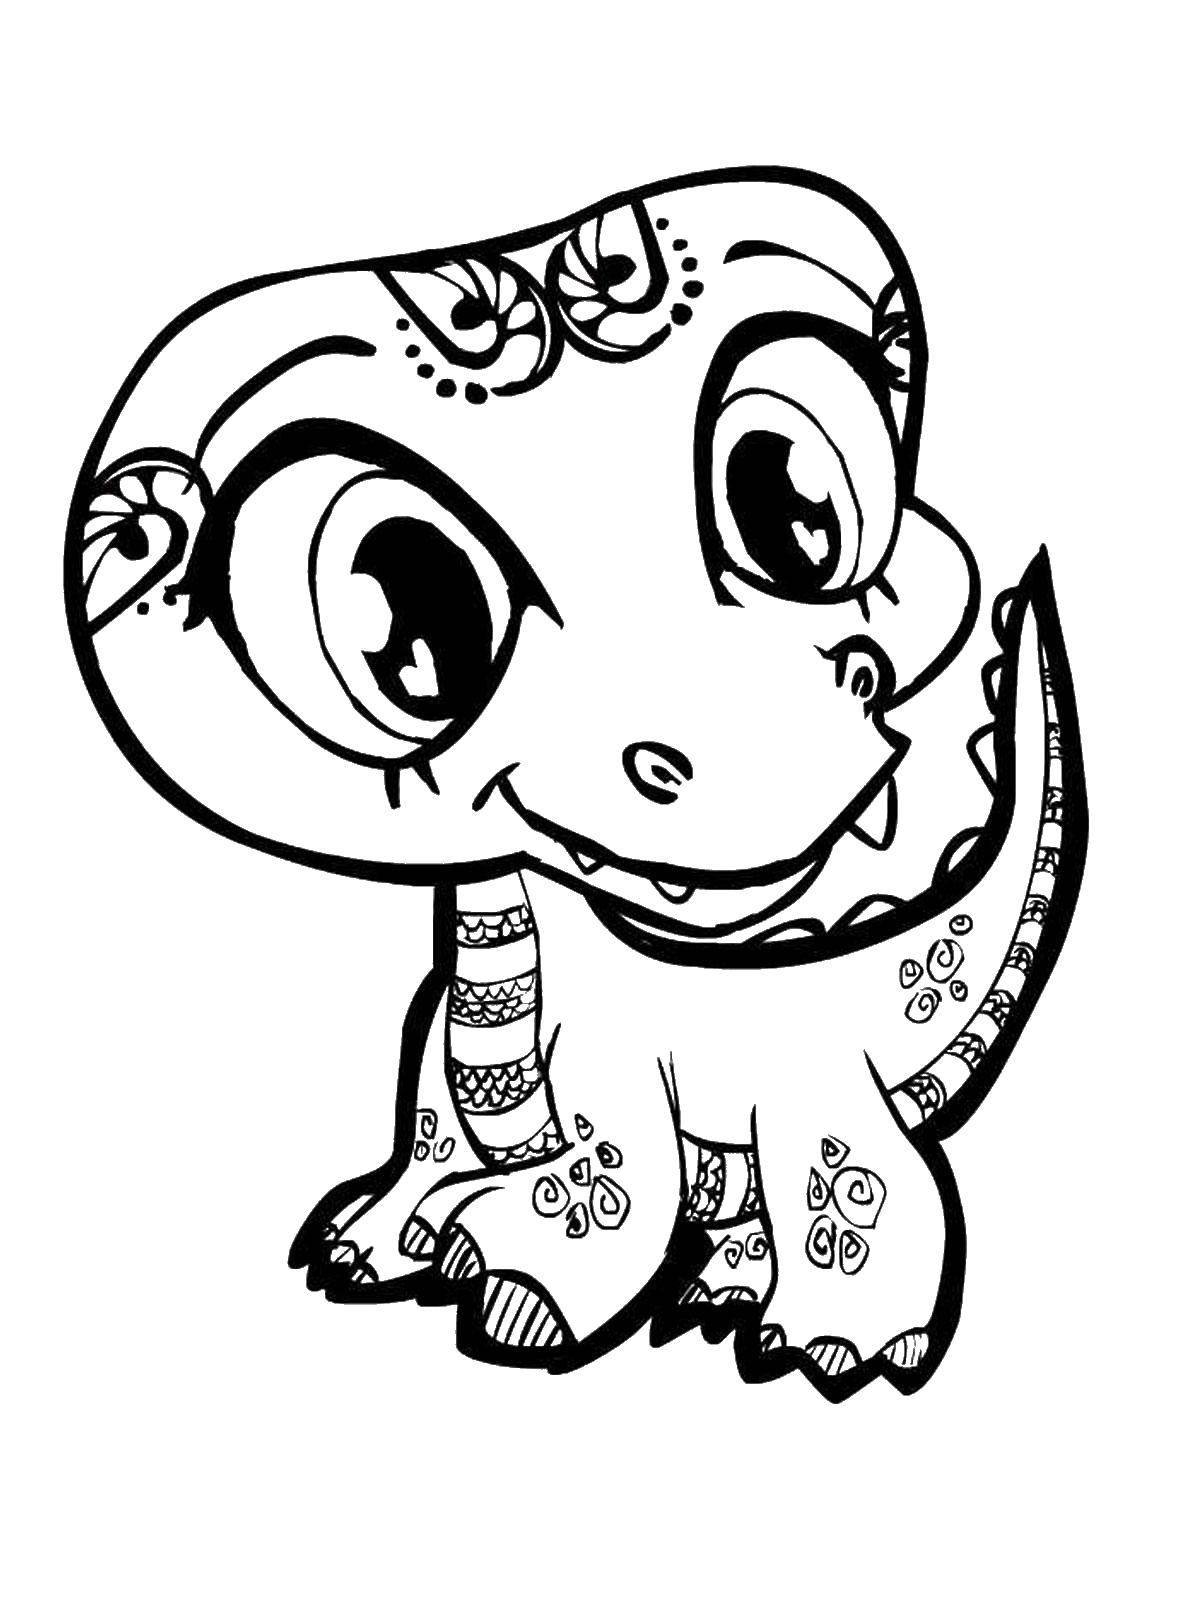 Coloring Toddler dinosaur patterns. Category animals cubs . Tags:  Dinosaurs.